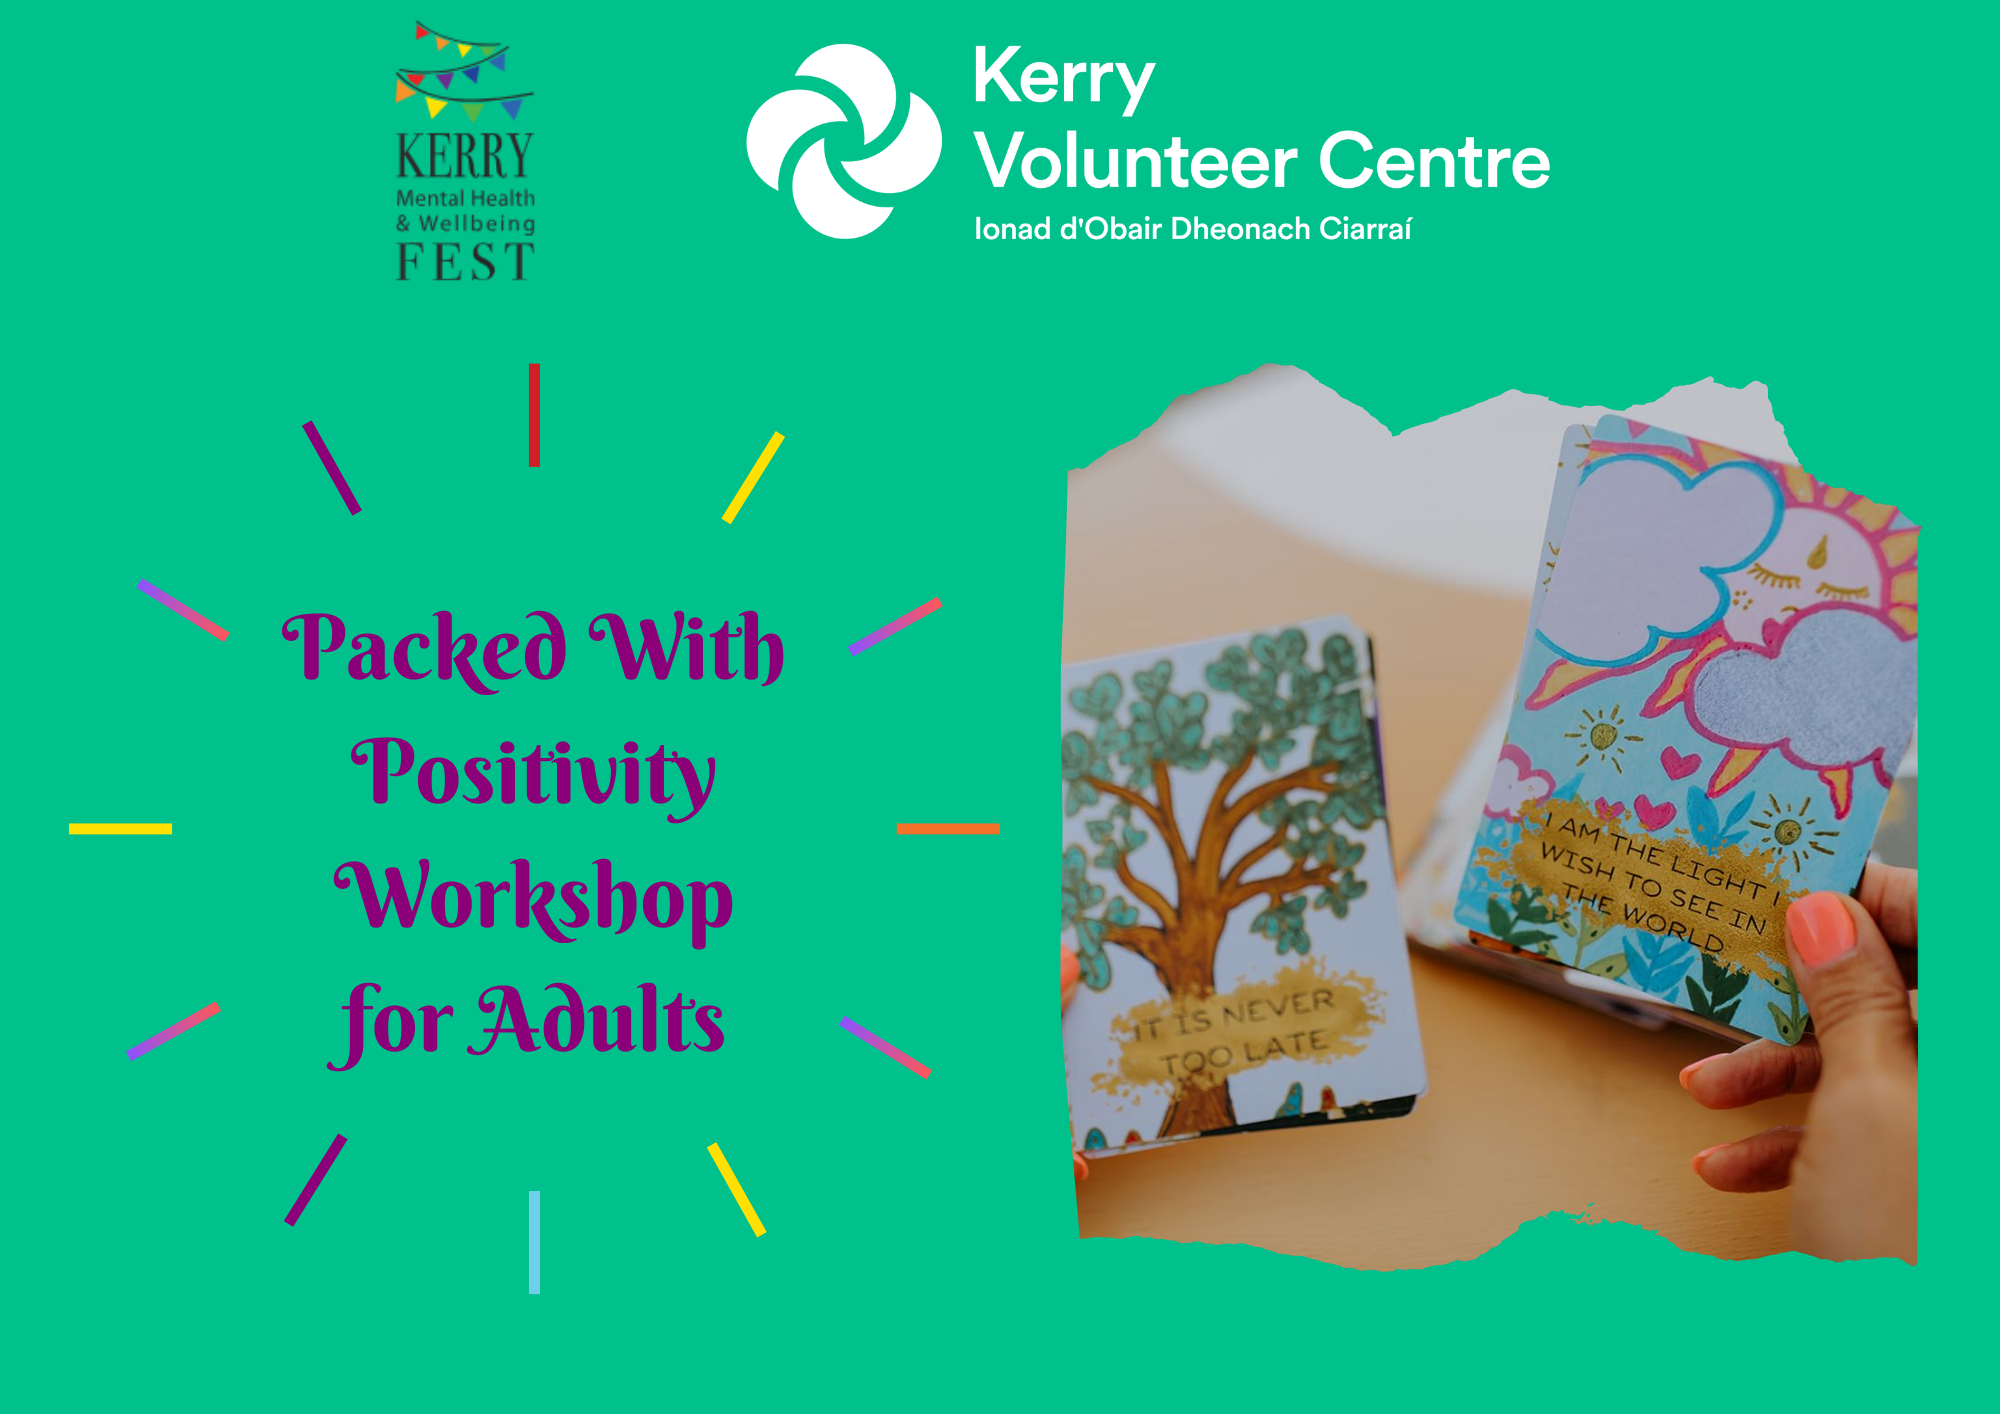 Packed With Positivity-Adult Workshop 1pm to 3pm event at Kerry Mental Health & Wellbeing Fest 2022